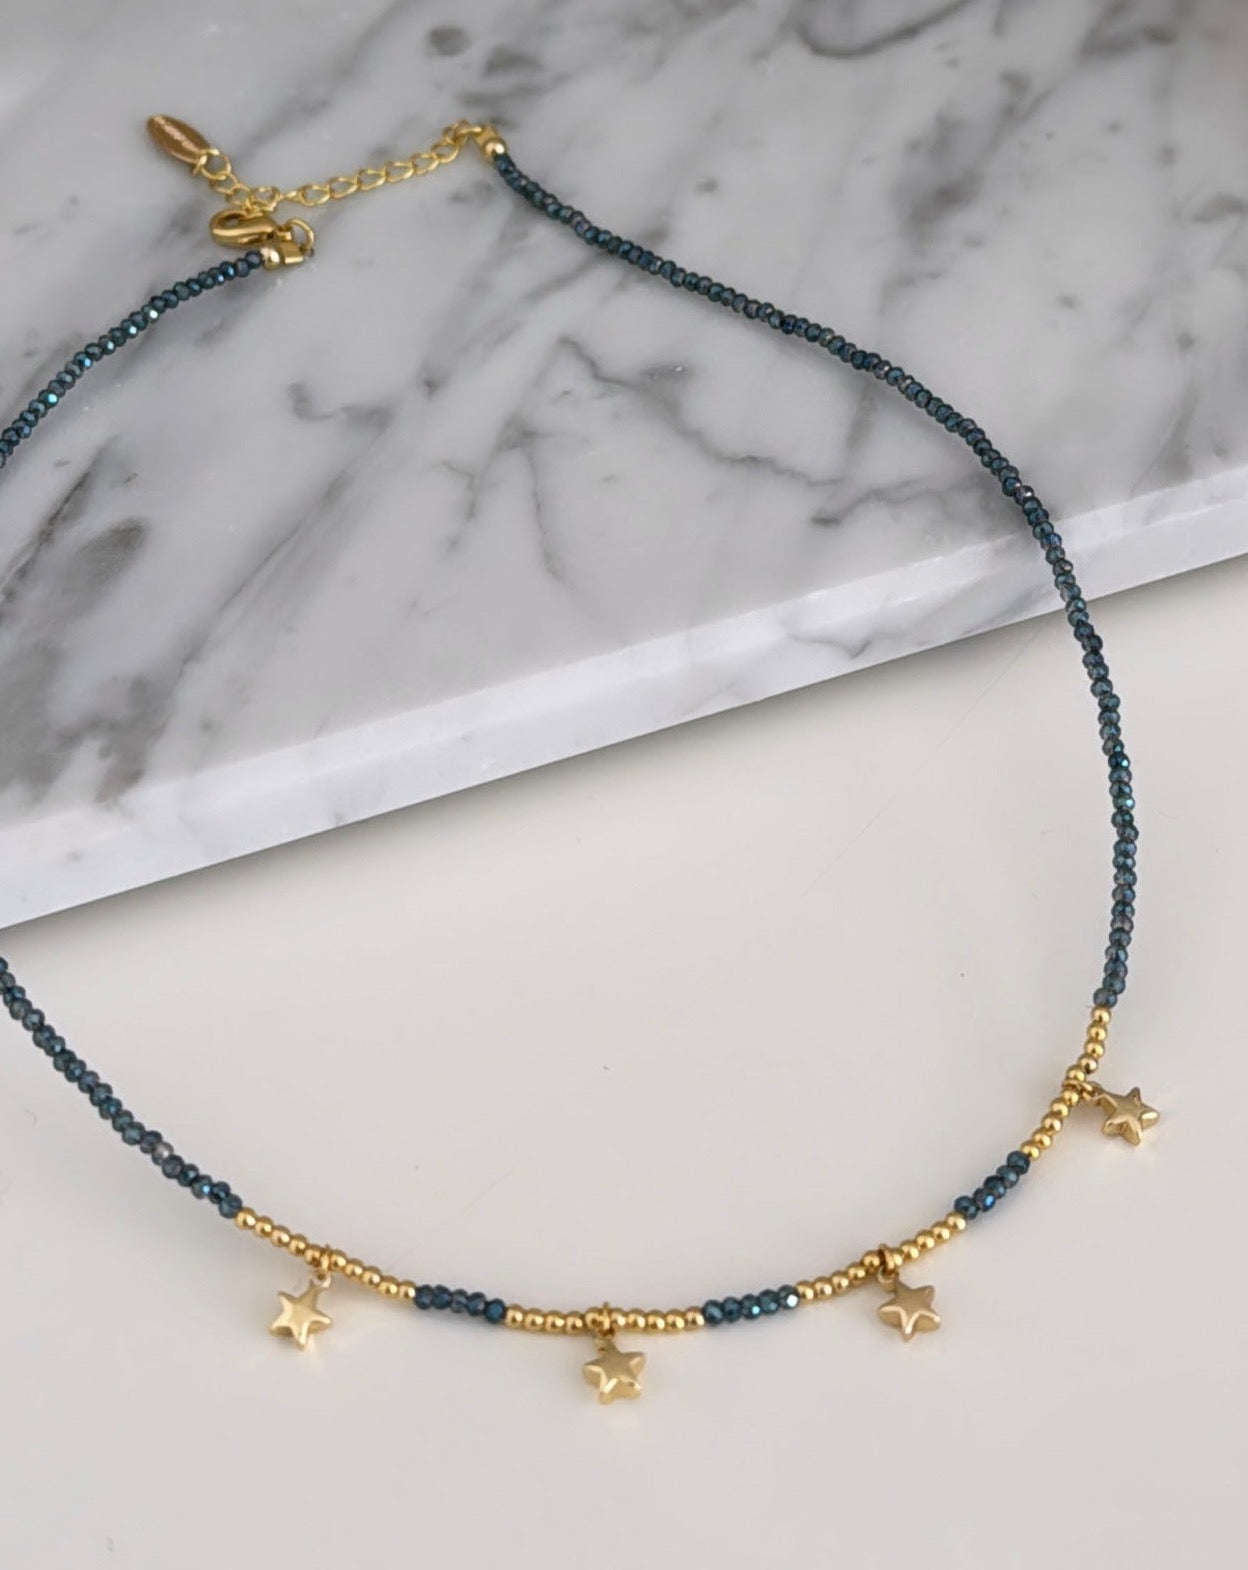 Stars Crystal Necklace